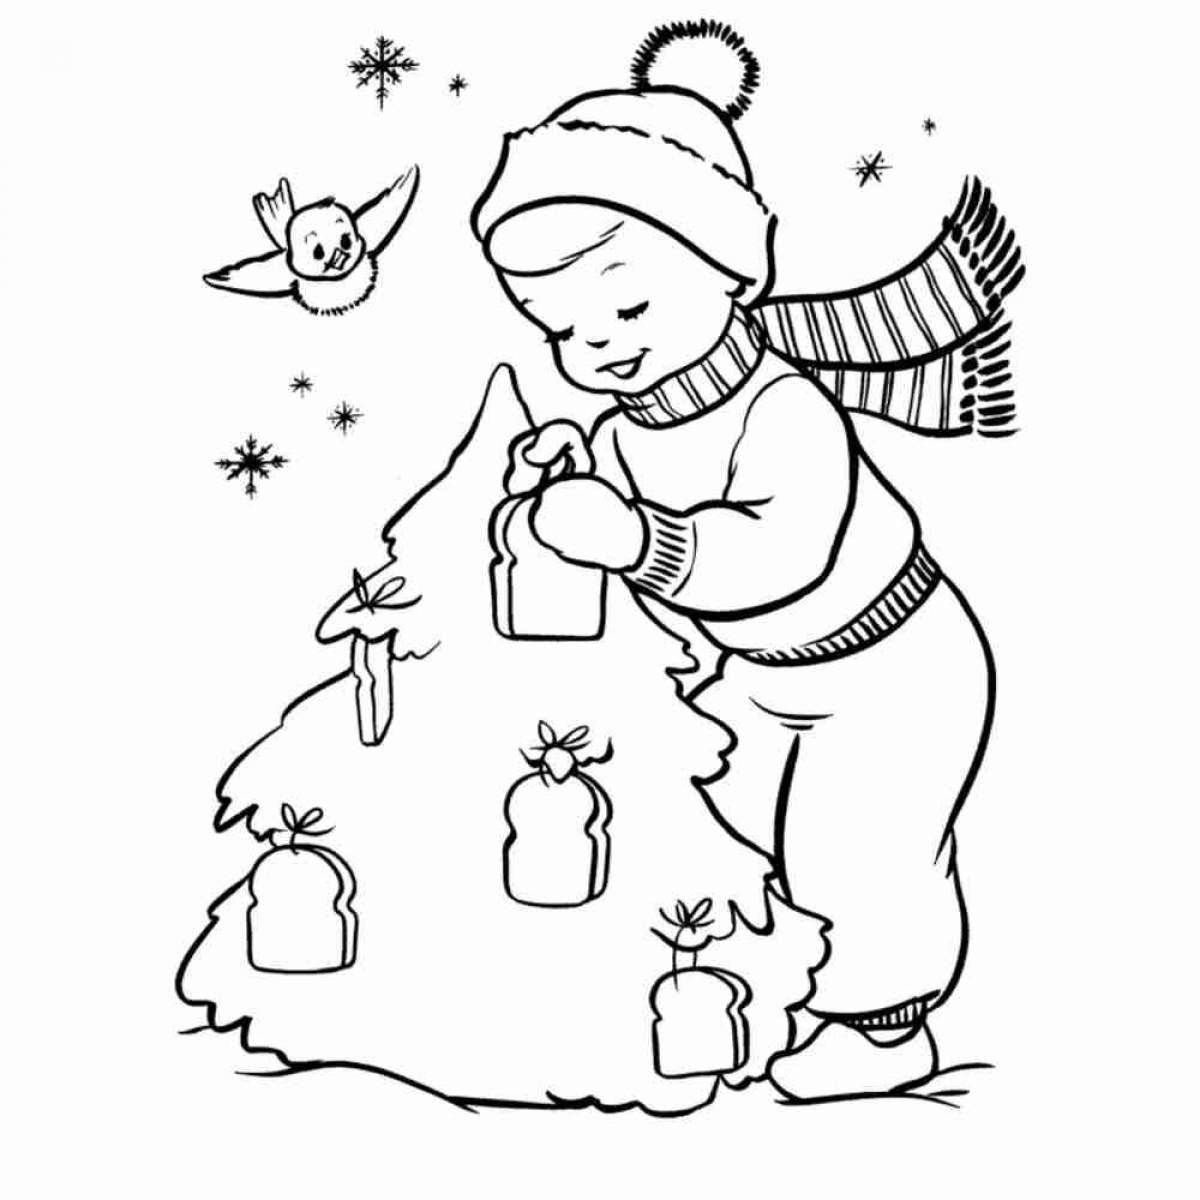 Playful Christmas coloring book for kids 6-7 years old